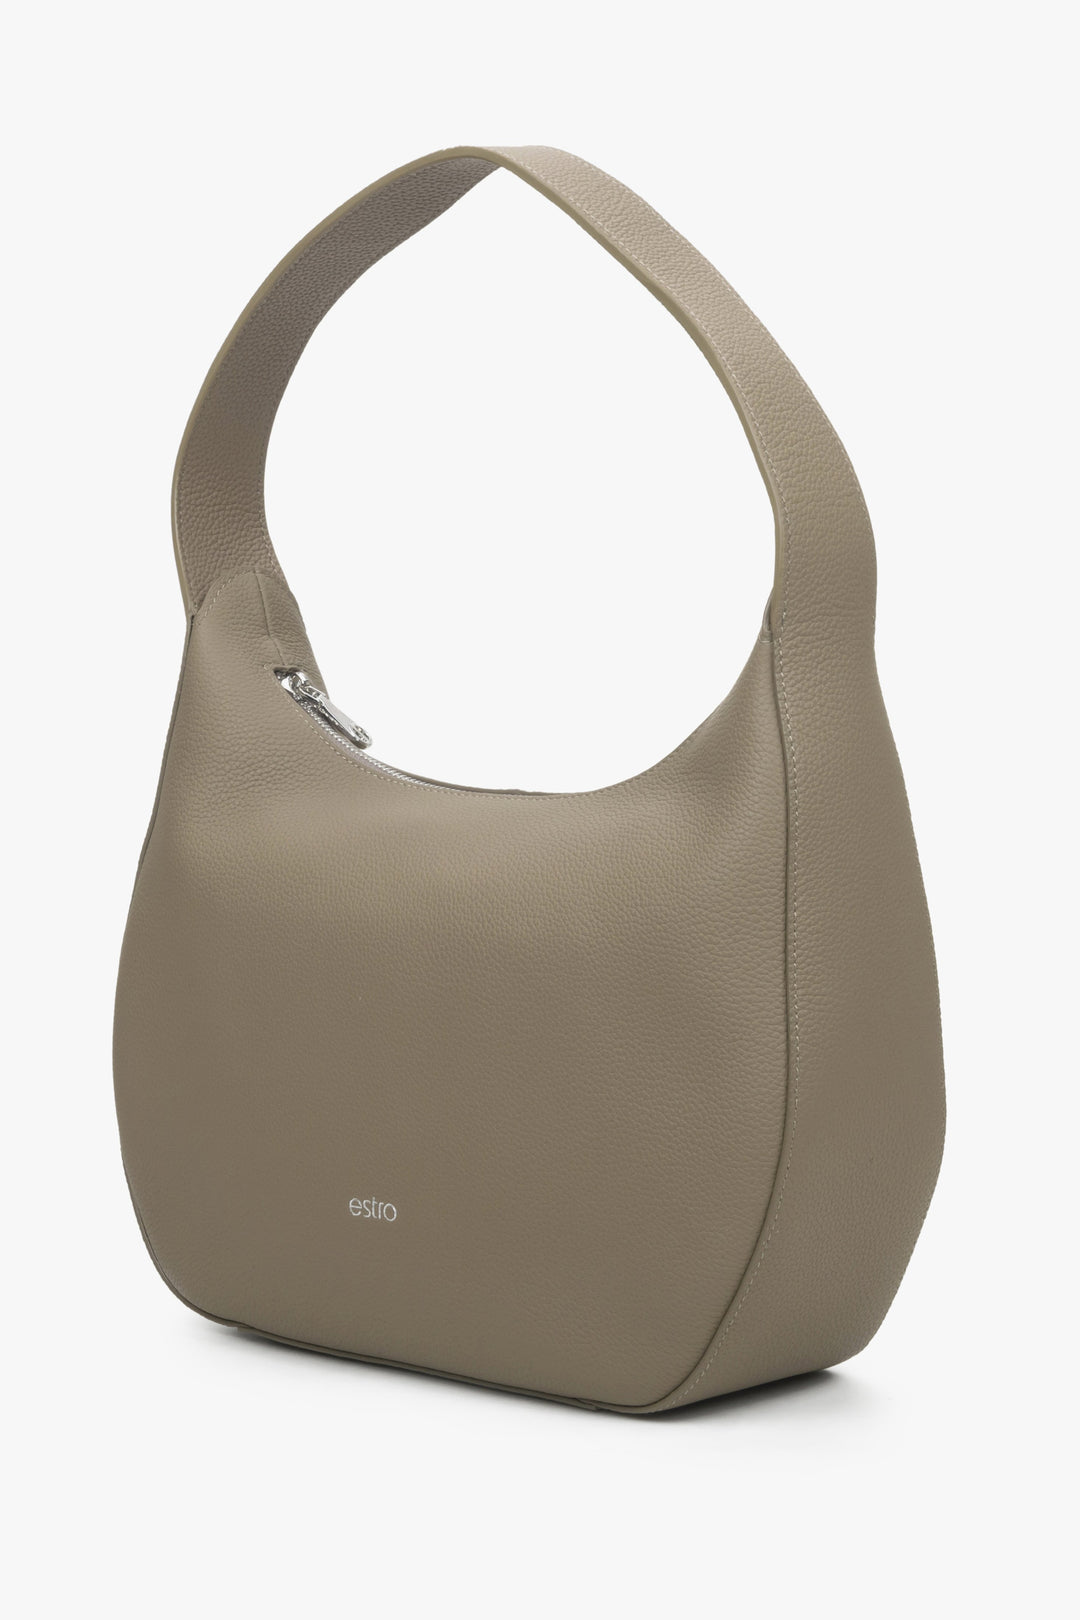 Women's crescent shaped shoulder bag made of genuine leather in brown and grey colour.